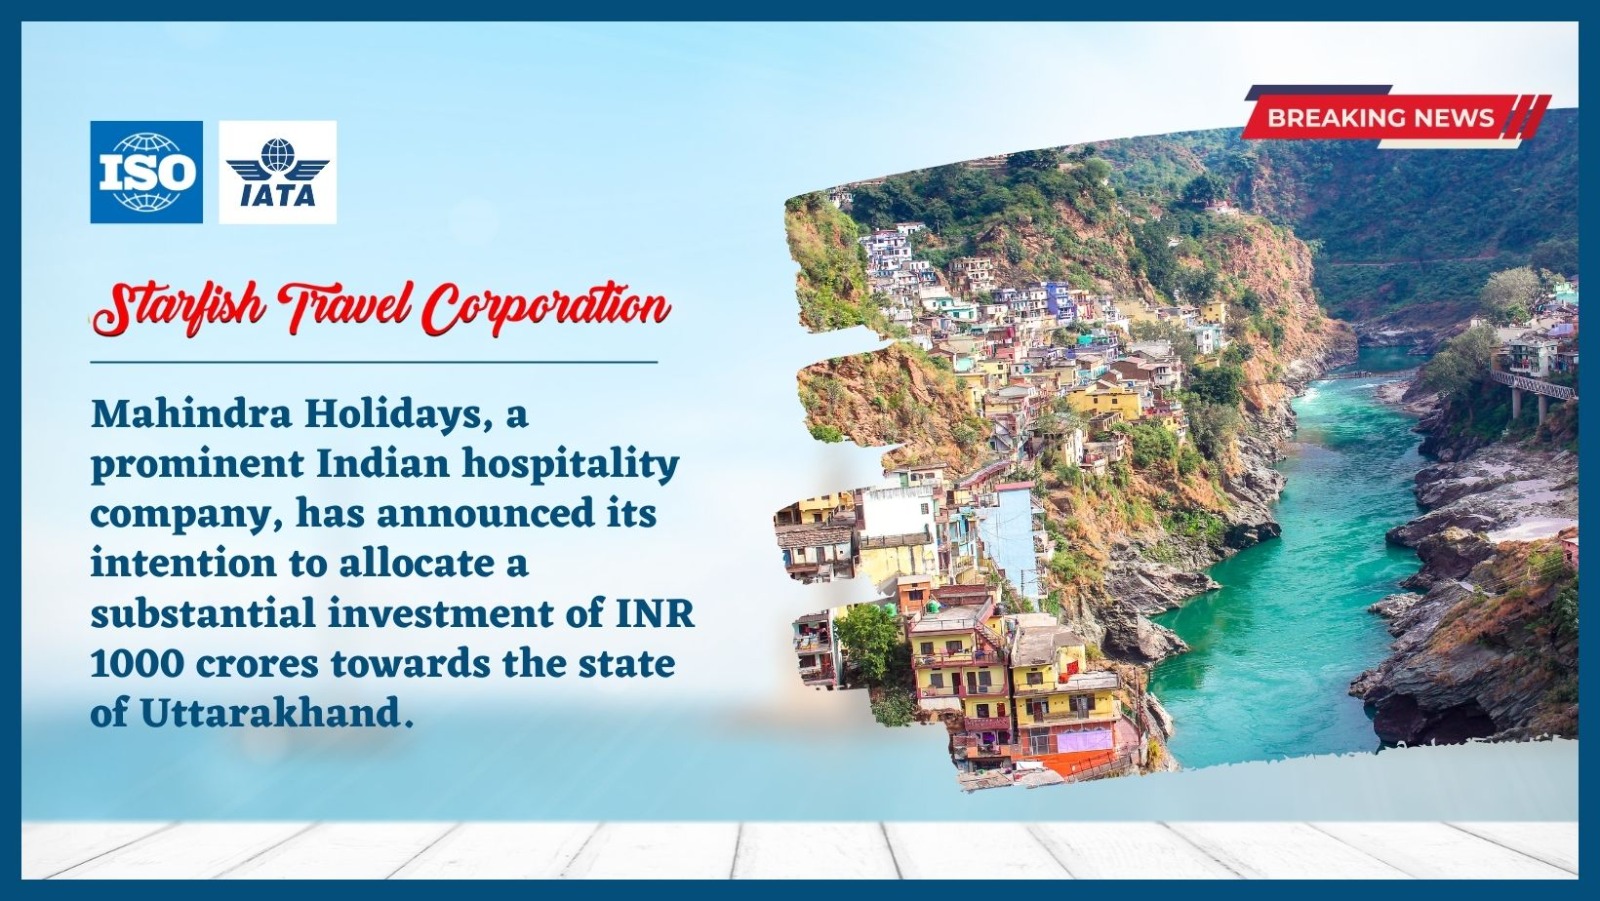 You are currently viewing Mahindra Holidays, a prominent Indian hospitality company, has announced its intention to allocate a substantial investment of INR 1000 crores towards the state of Uttarakhand.